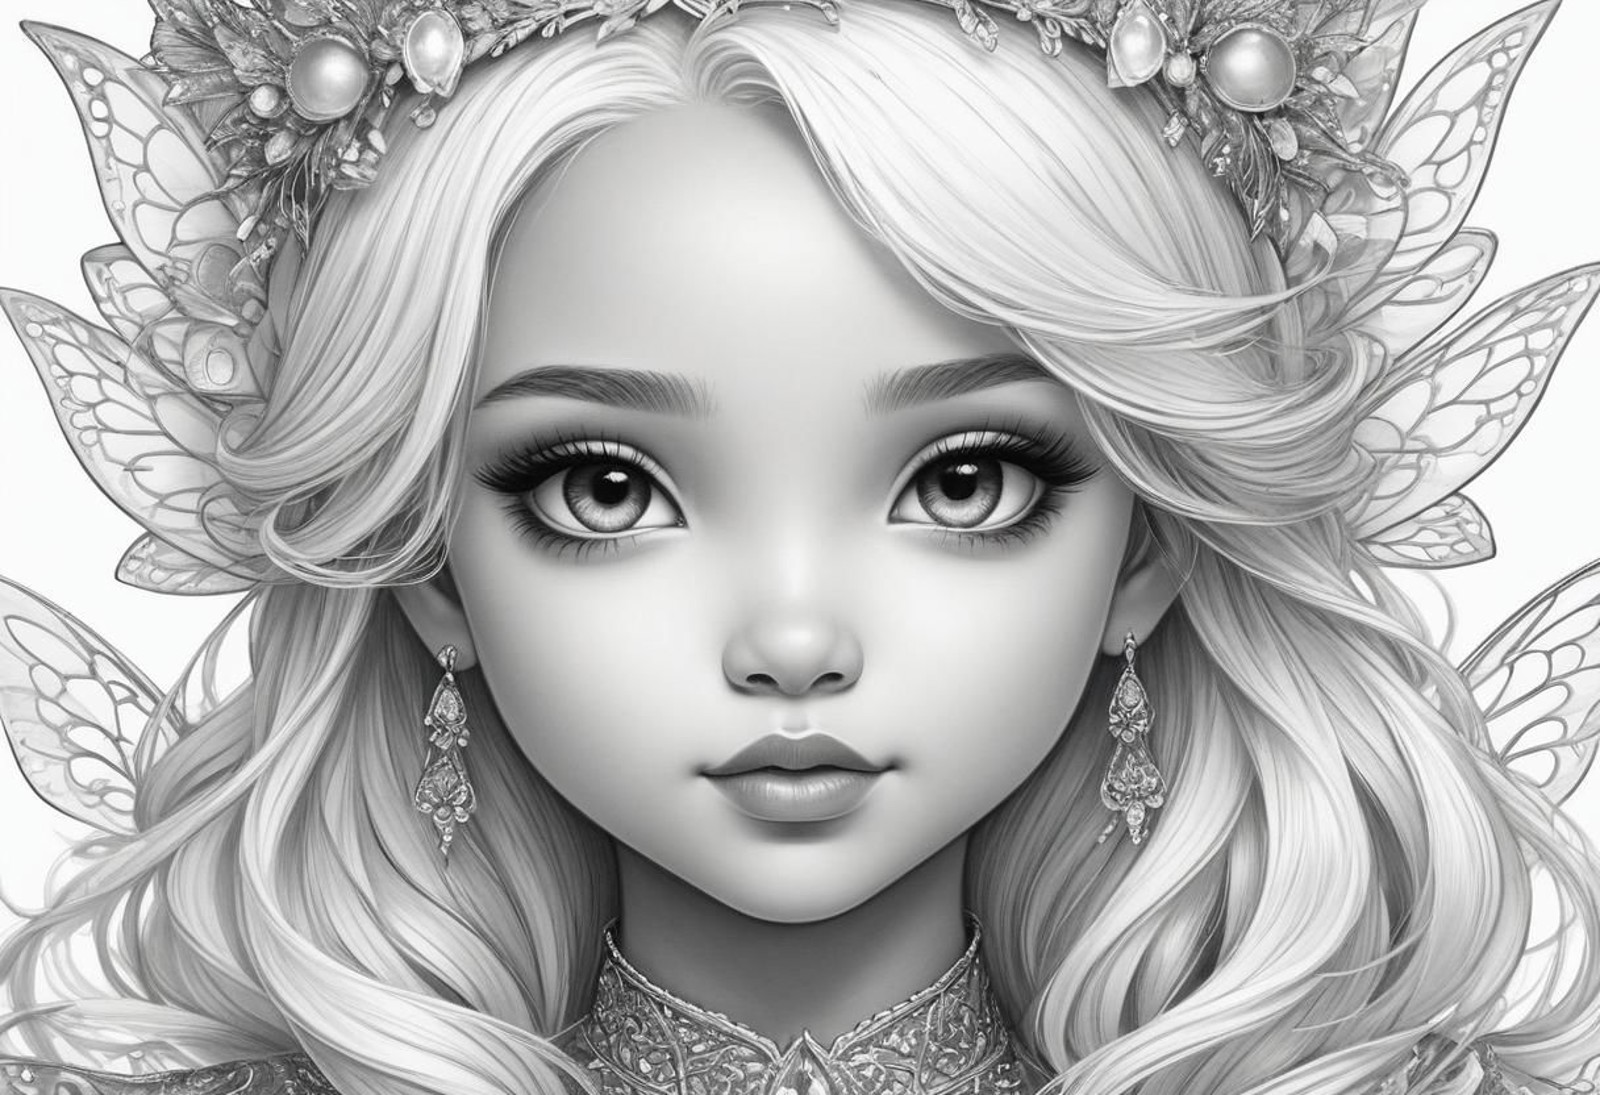 A stunning ink drawing children coloring page of whimsical magnificent [black princess Fairy],ultra close up front view ha...